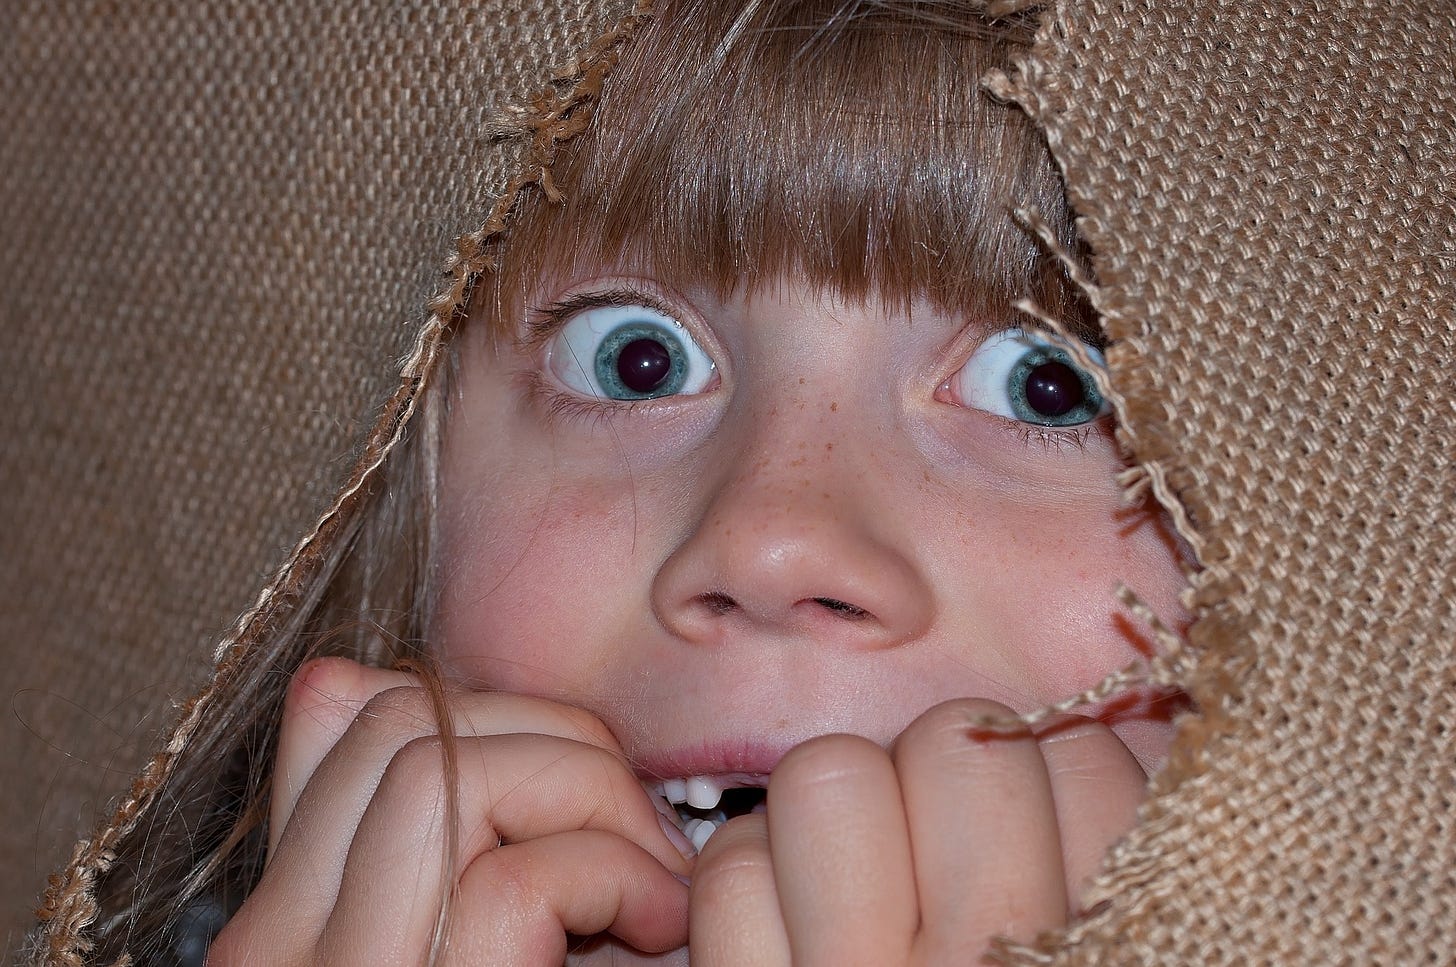 Frightened child with big blue eyes looking through a ripped brown cloth